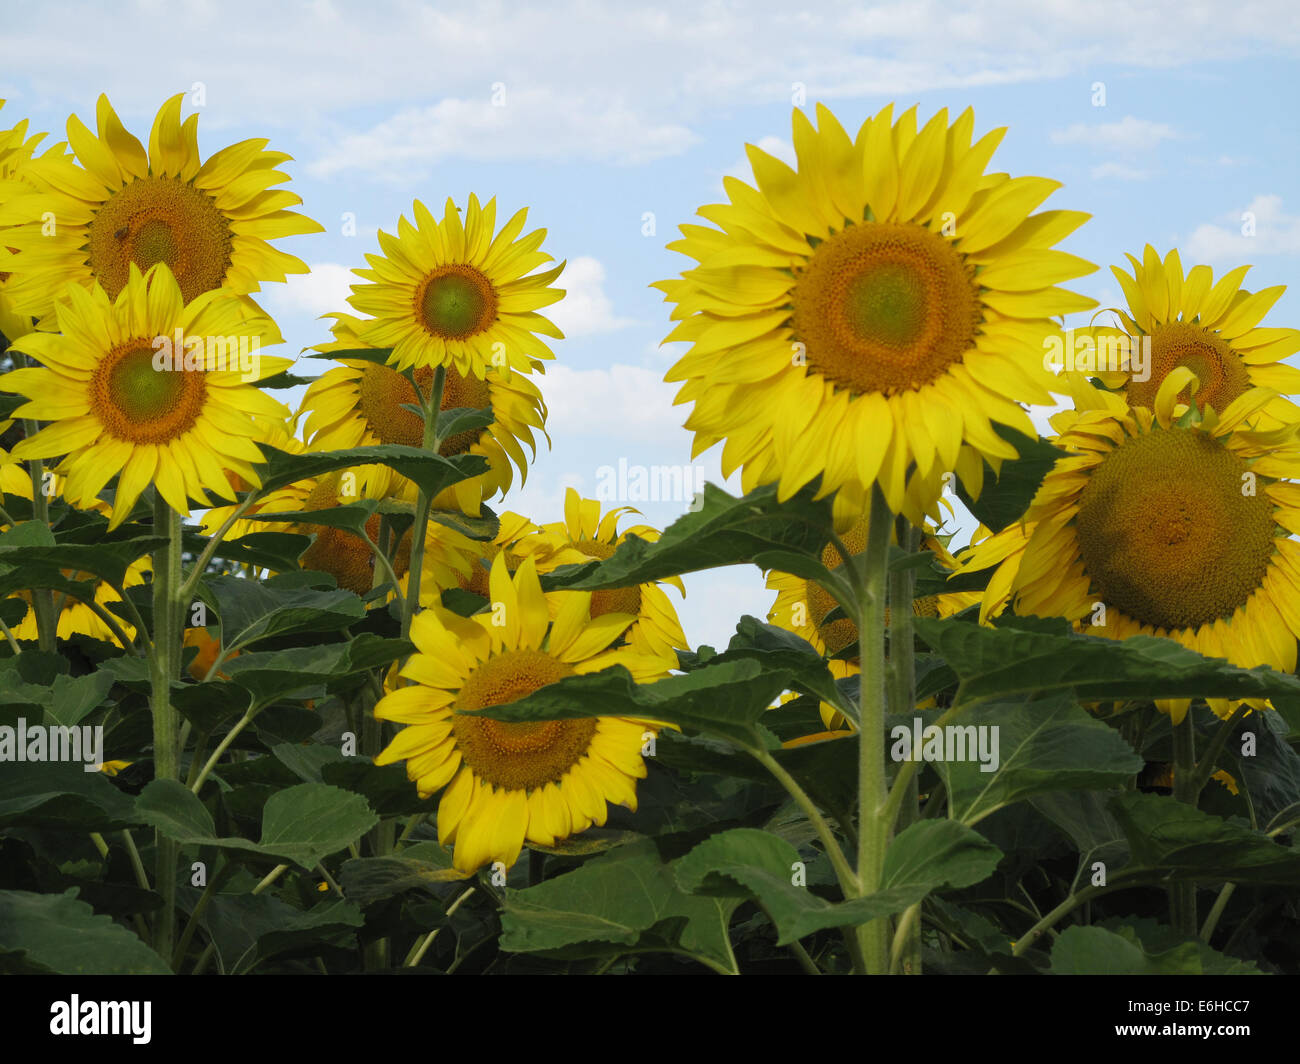 Close-up view of sunflowers on a sunny day Stock Photo